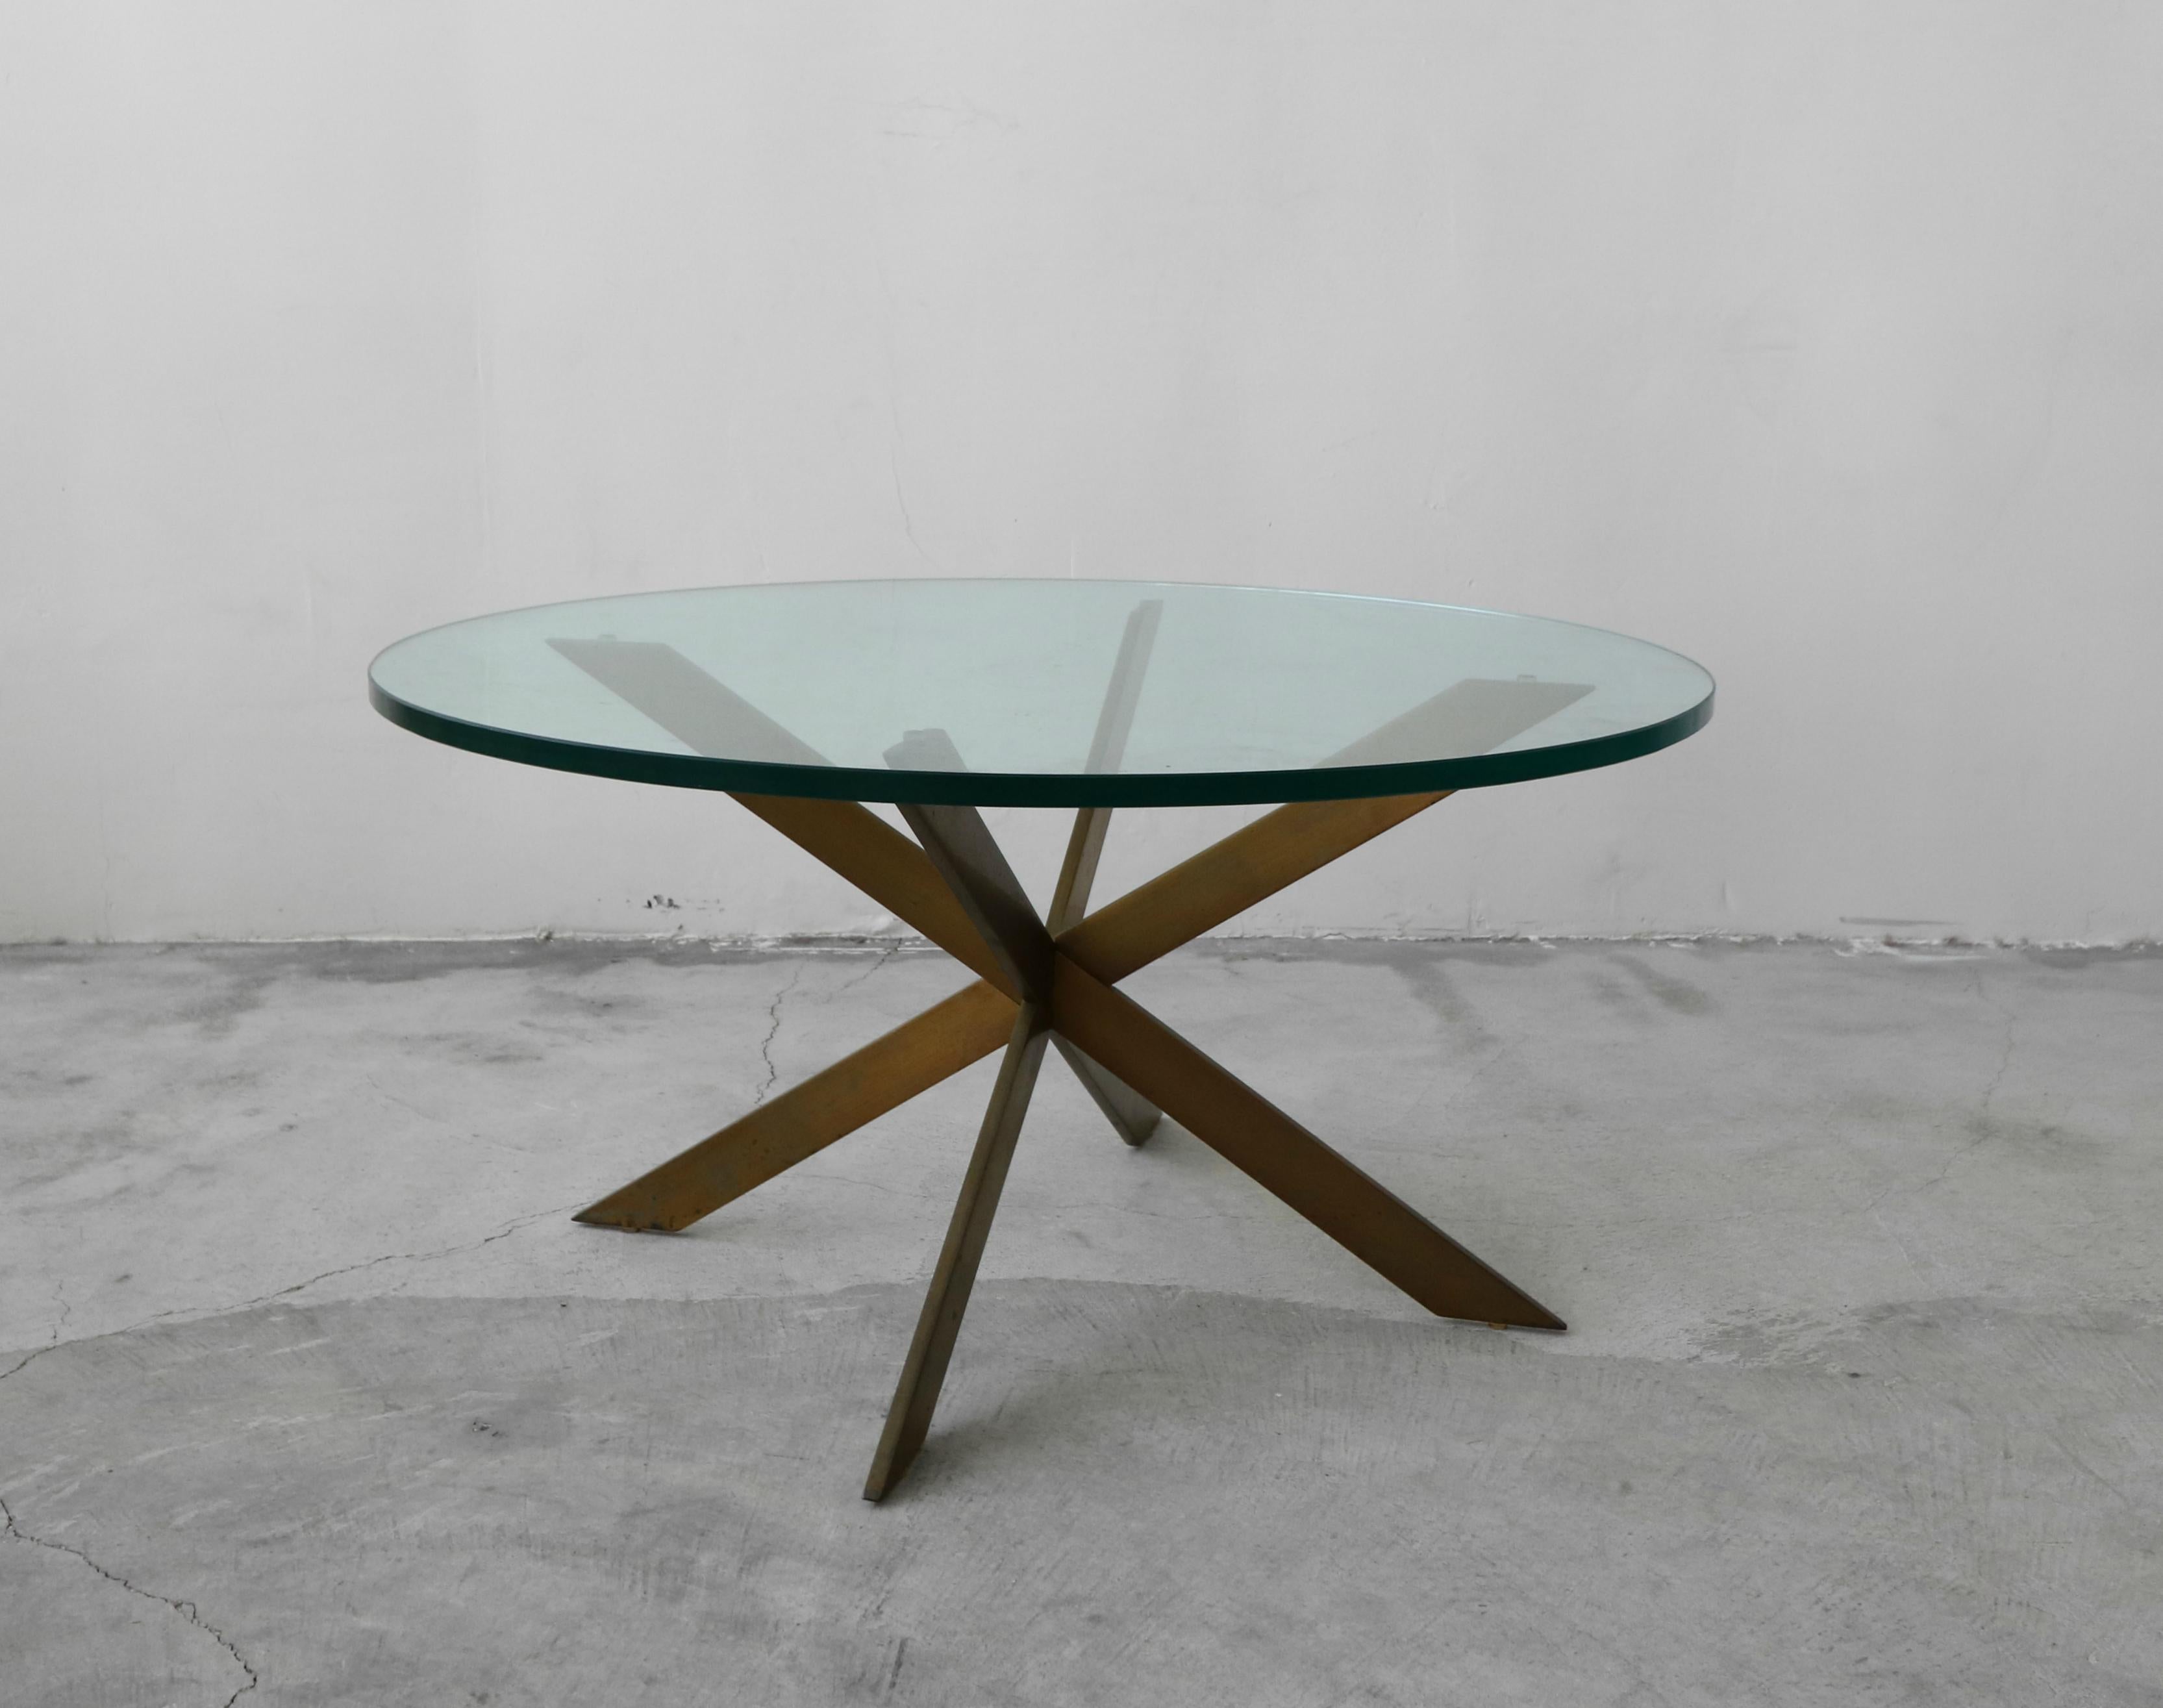 A beautiful solid bronze coffee table by Leon Rosen for base. Such a simple, yet modern and elegant piece. Base is solid bronze, weighing at least 40lbs.

Bronze has the most beautiful patina. Left as found, could be polished to bring it back to